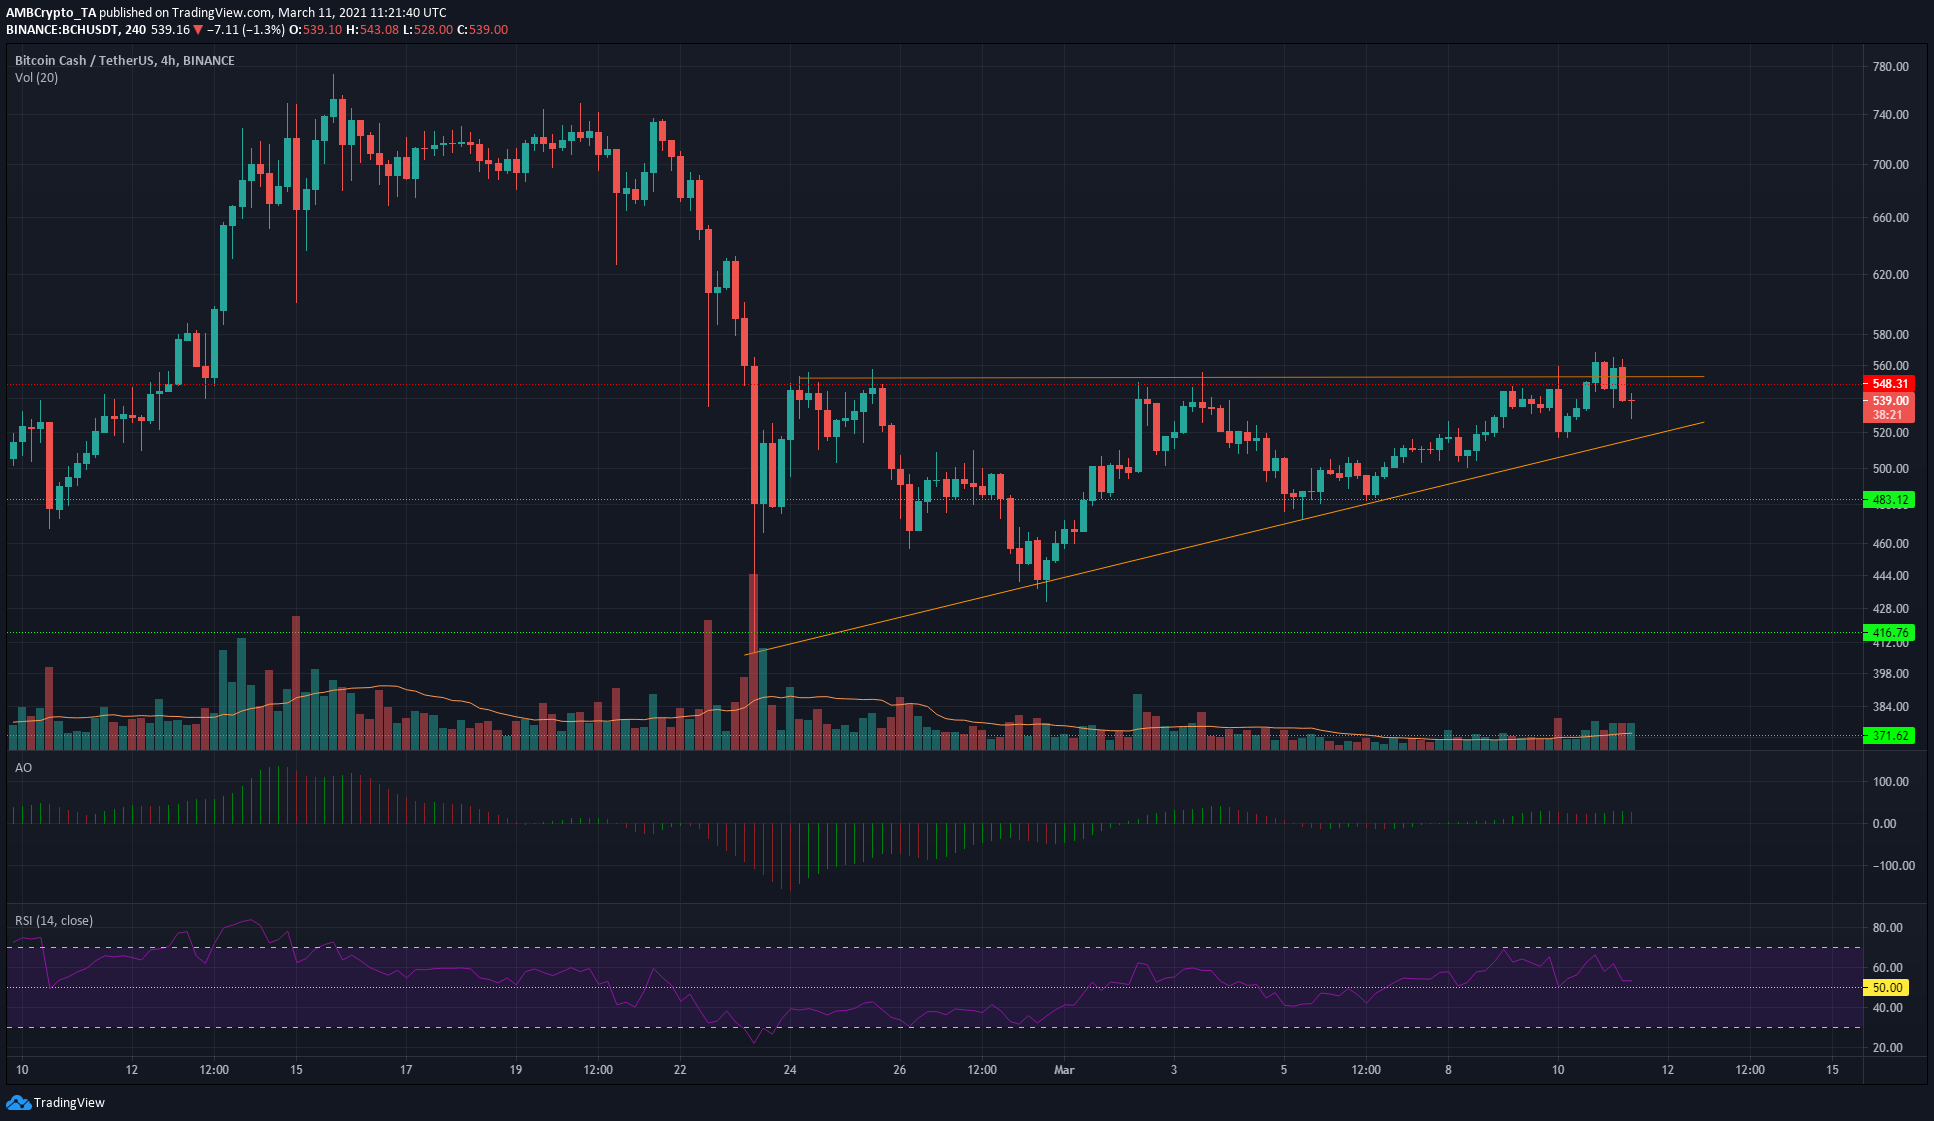 Bitcoin Cash, Ethereum Classic, VeChain Price Analysis: 11 March